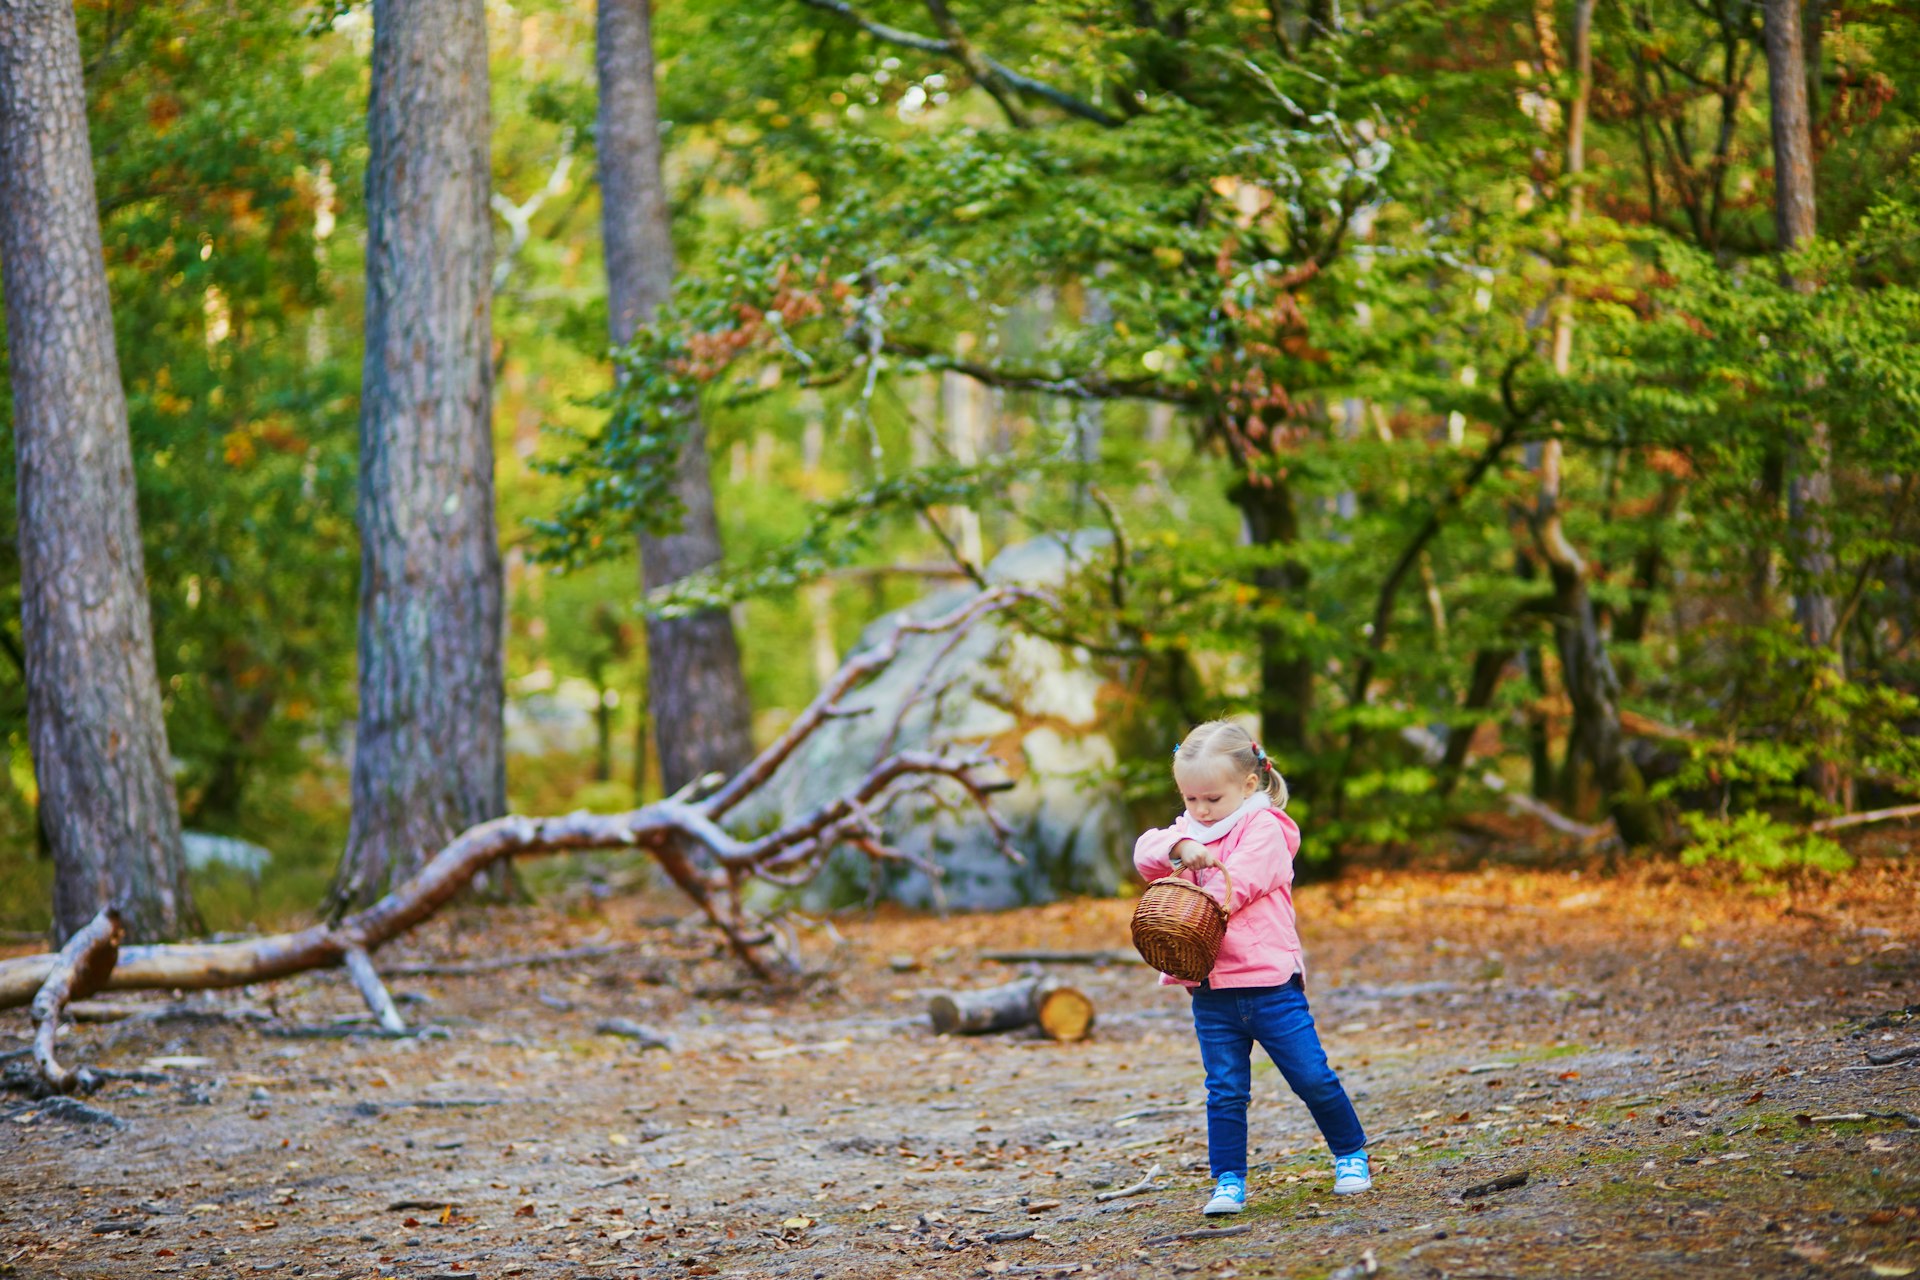 A toddler picks mushrooms in fall in the Forêt de Fontainebleau, Île de France, France